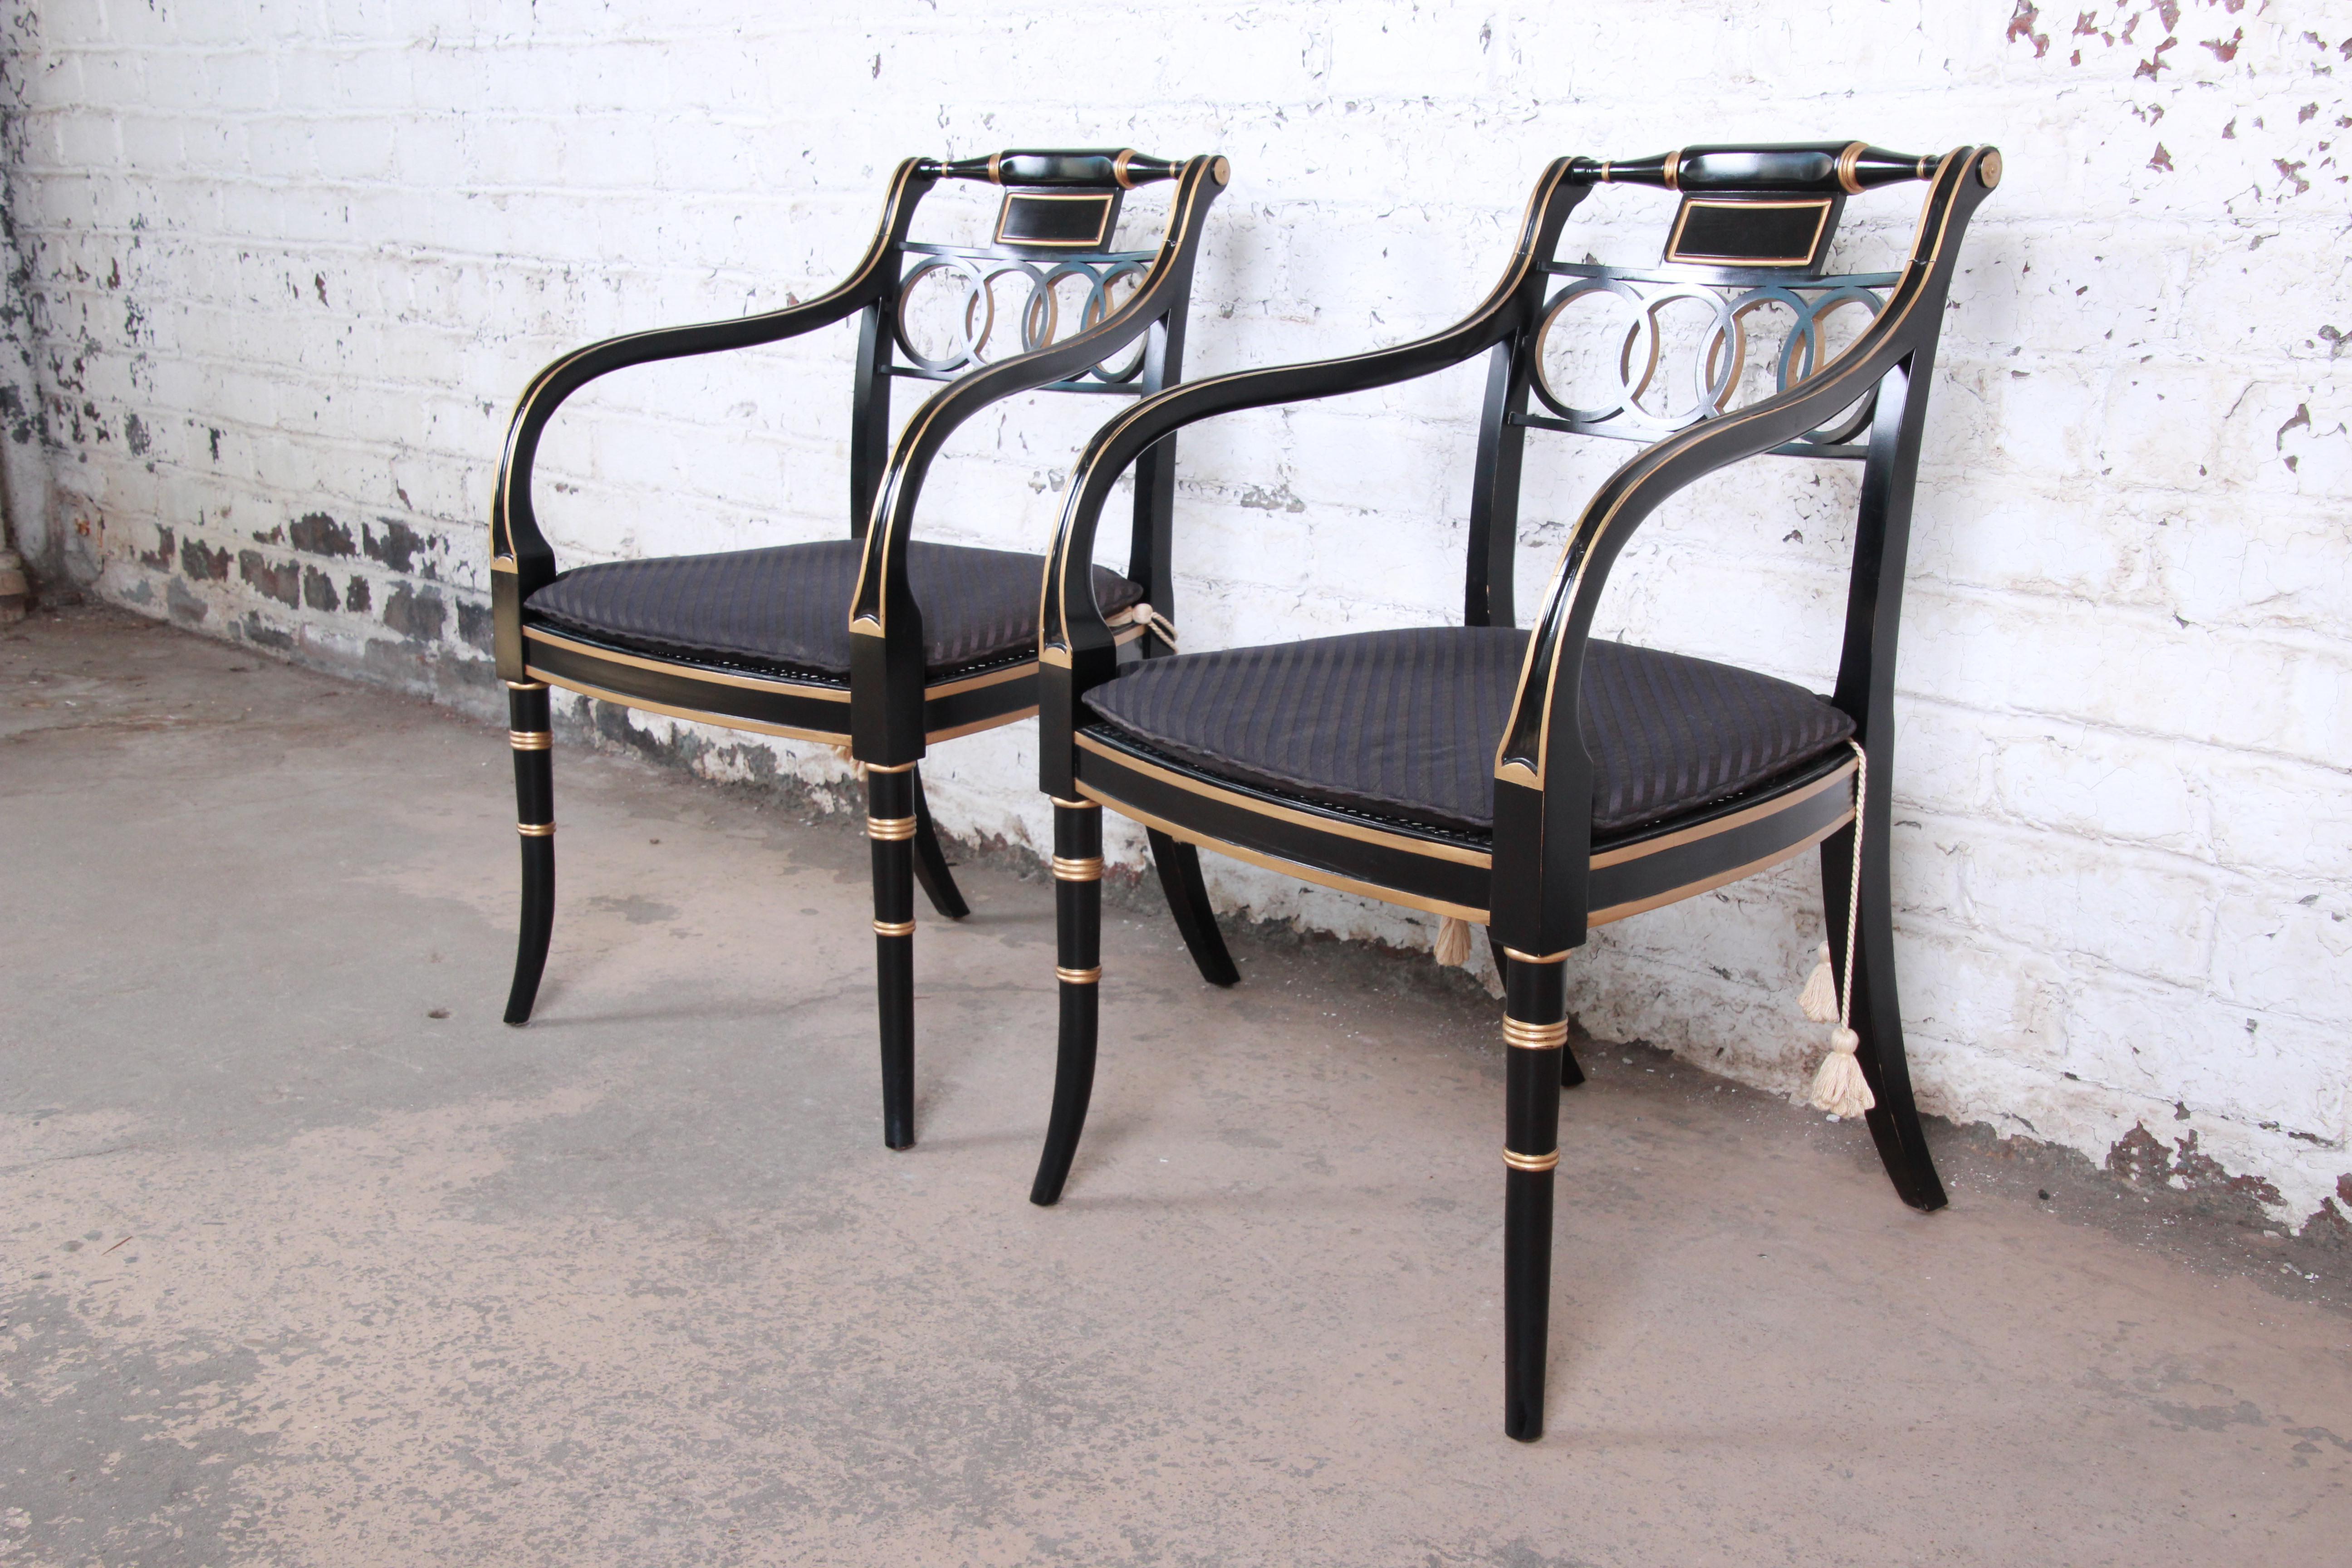 An exceptional pair of Regency style armchairs from the Historic Charleston collection by Baker Furniture. The chairs feature stunning ebonized and gold gilt solid wood frames with caned seats and removable seat cushions. Made with the highest